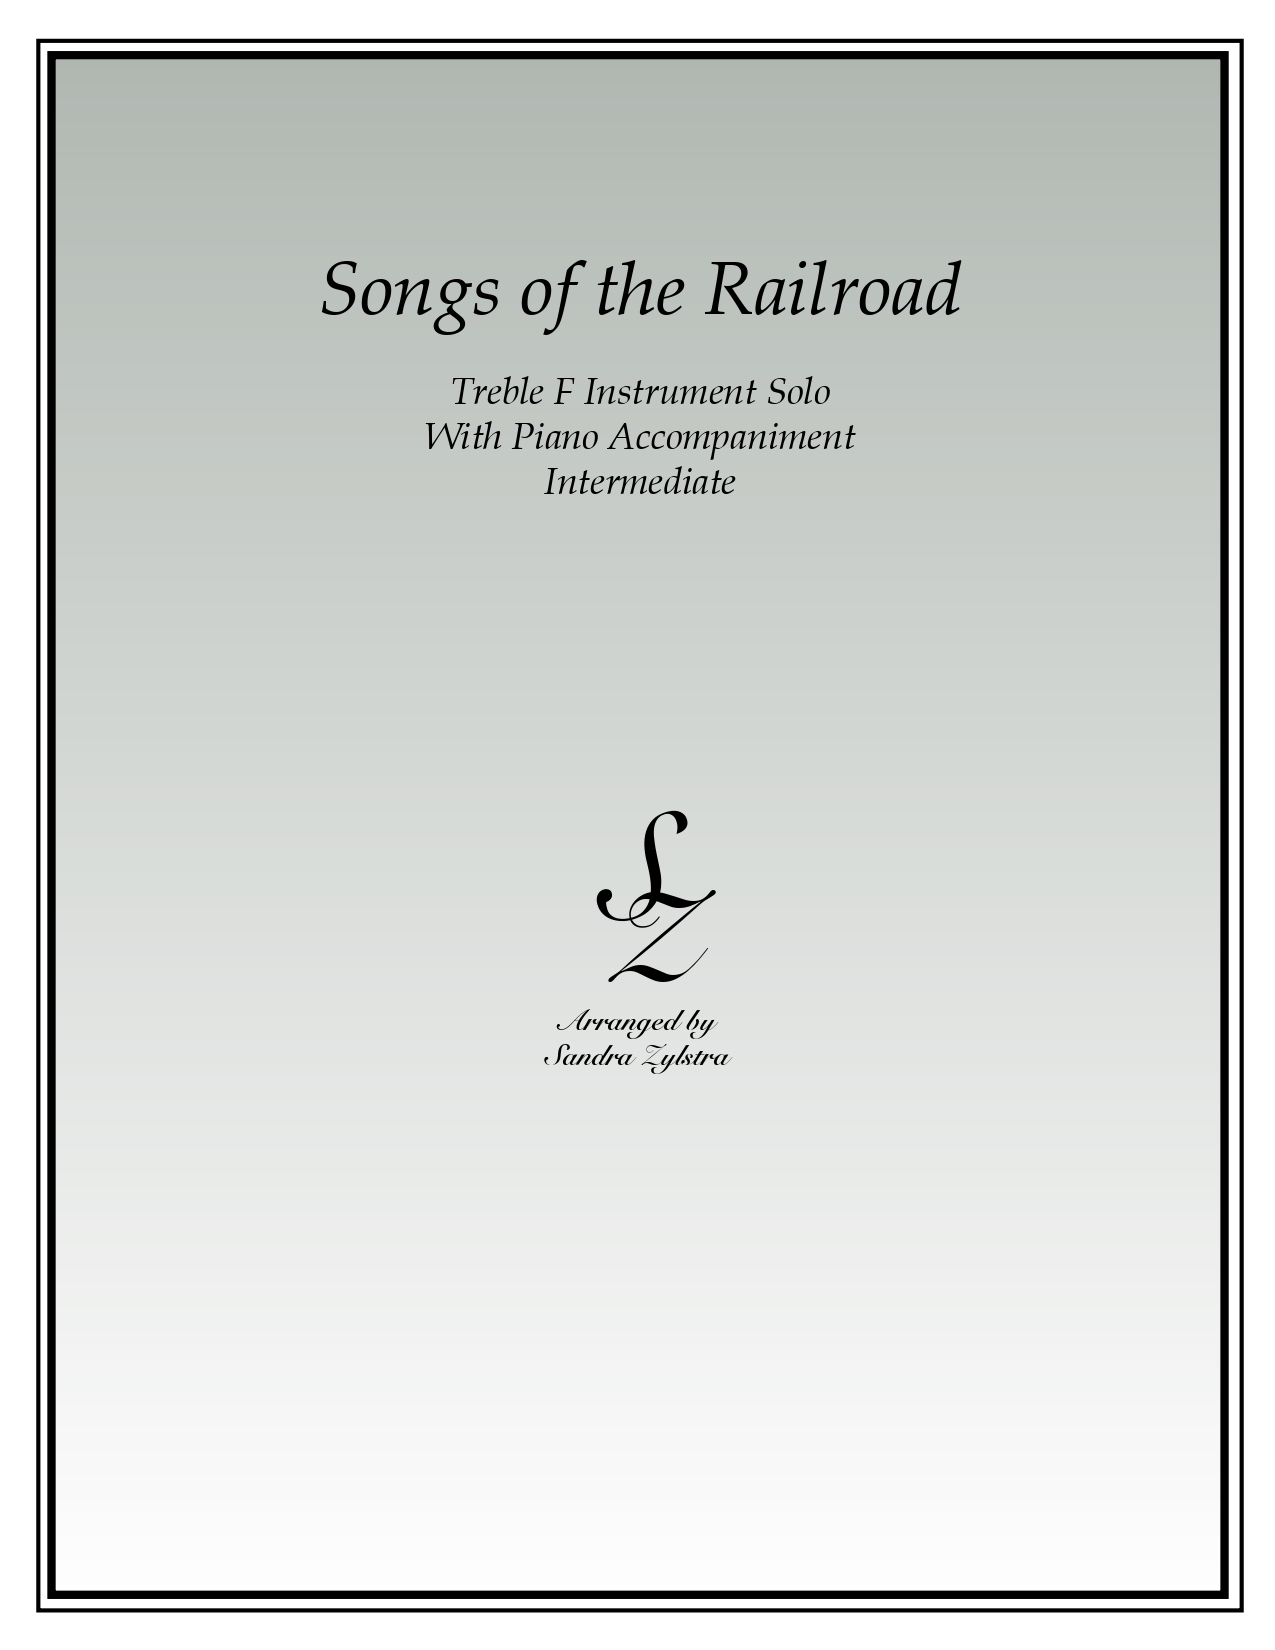 Songs Of The Railroad F instrument solo part cover page 00011